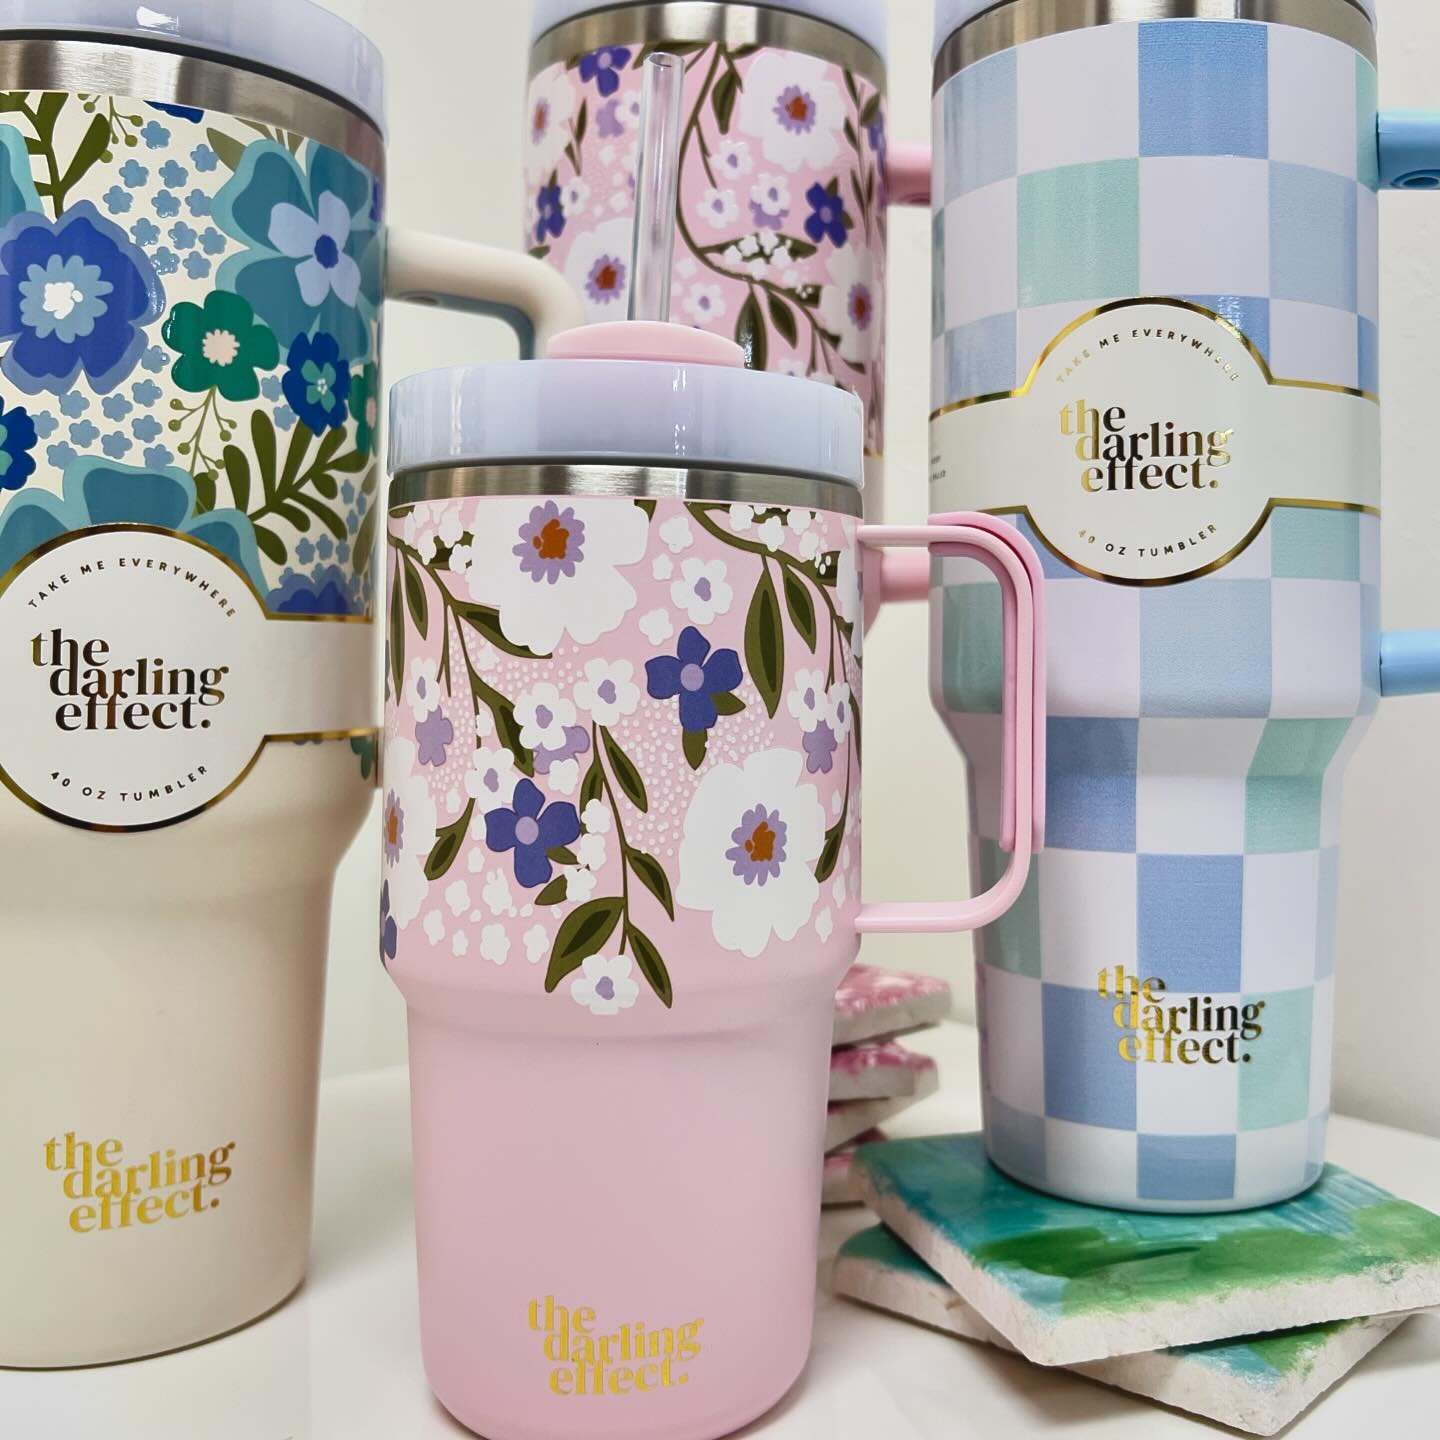 We have been OBSESSED with our new Take-Me-Everywhere Tumblers from @thedarlingeffect 🤭😍 These stainless steel, double-wall insulated tumblers come in 40 oz. &amp; 20 oz. sizes that are perfect for on the go! Stop by the gallery Tues-Sun from 11-7 